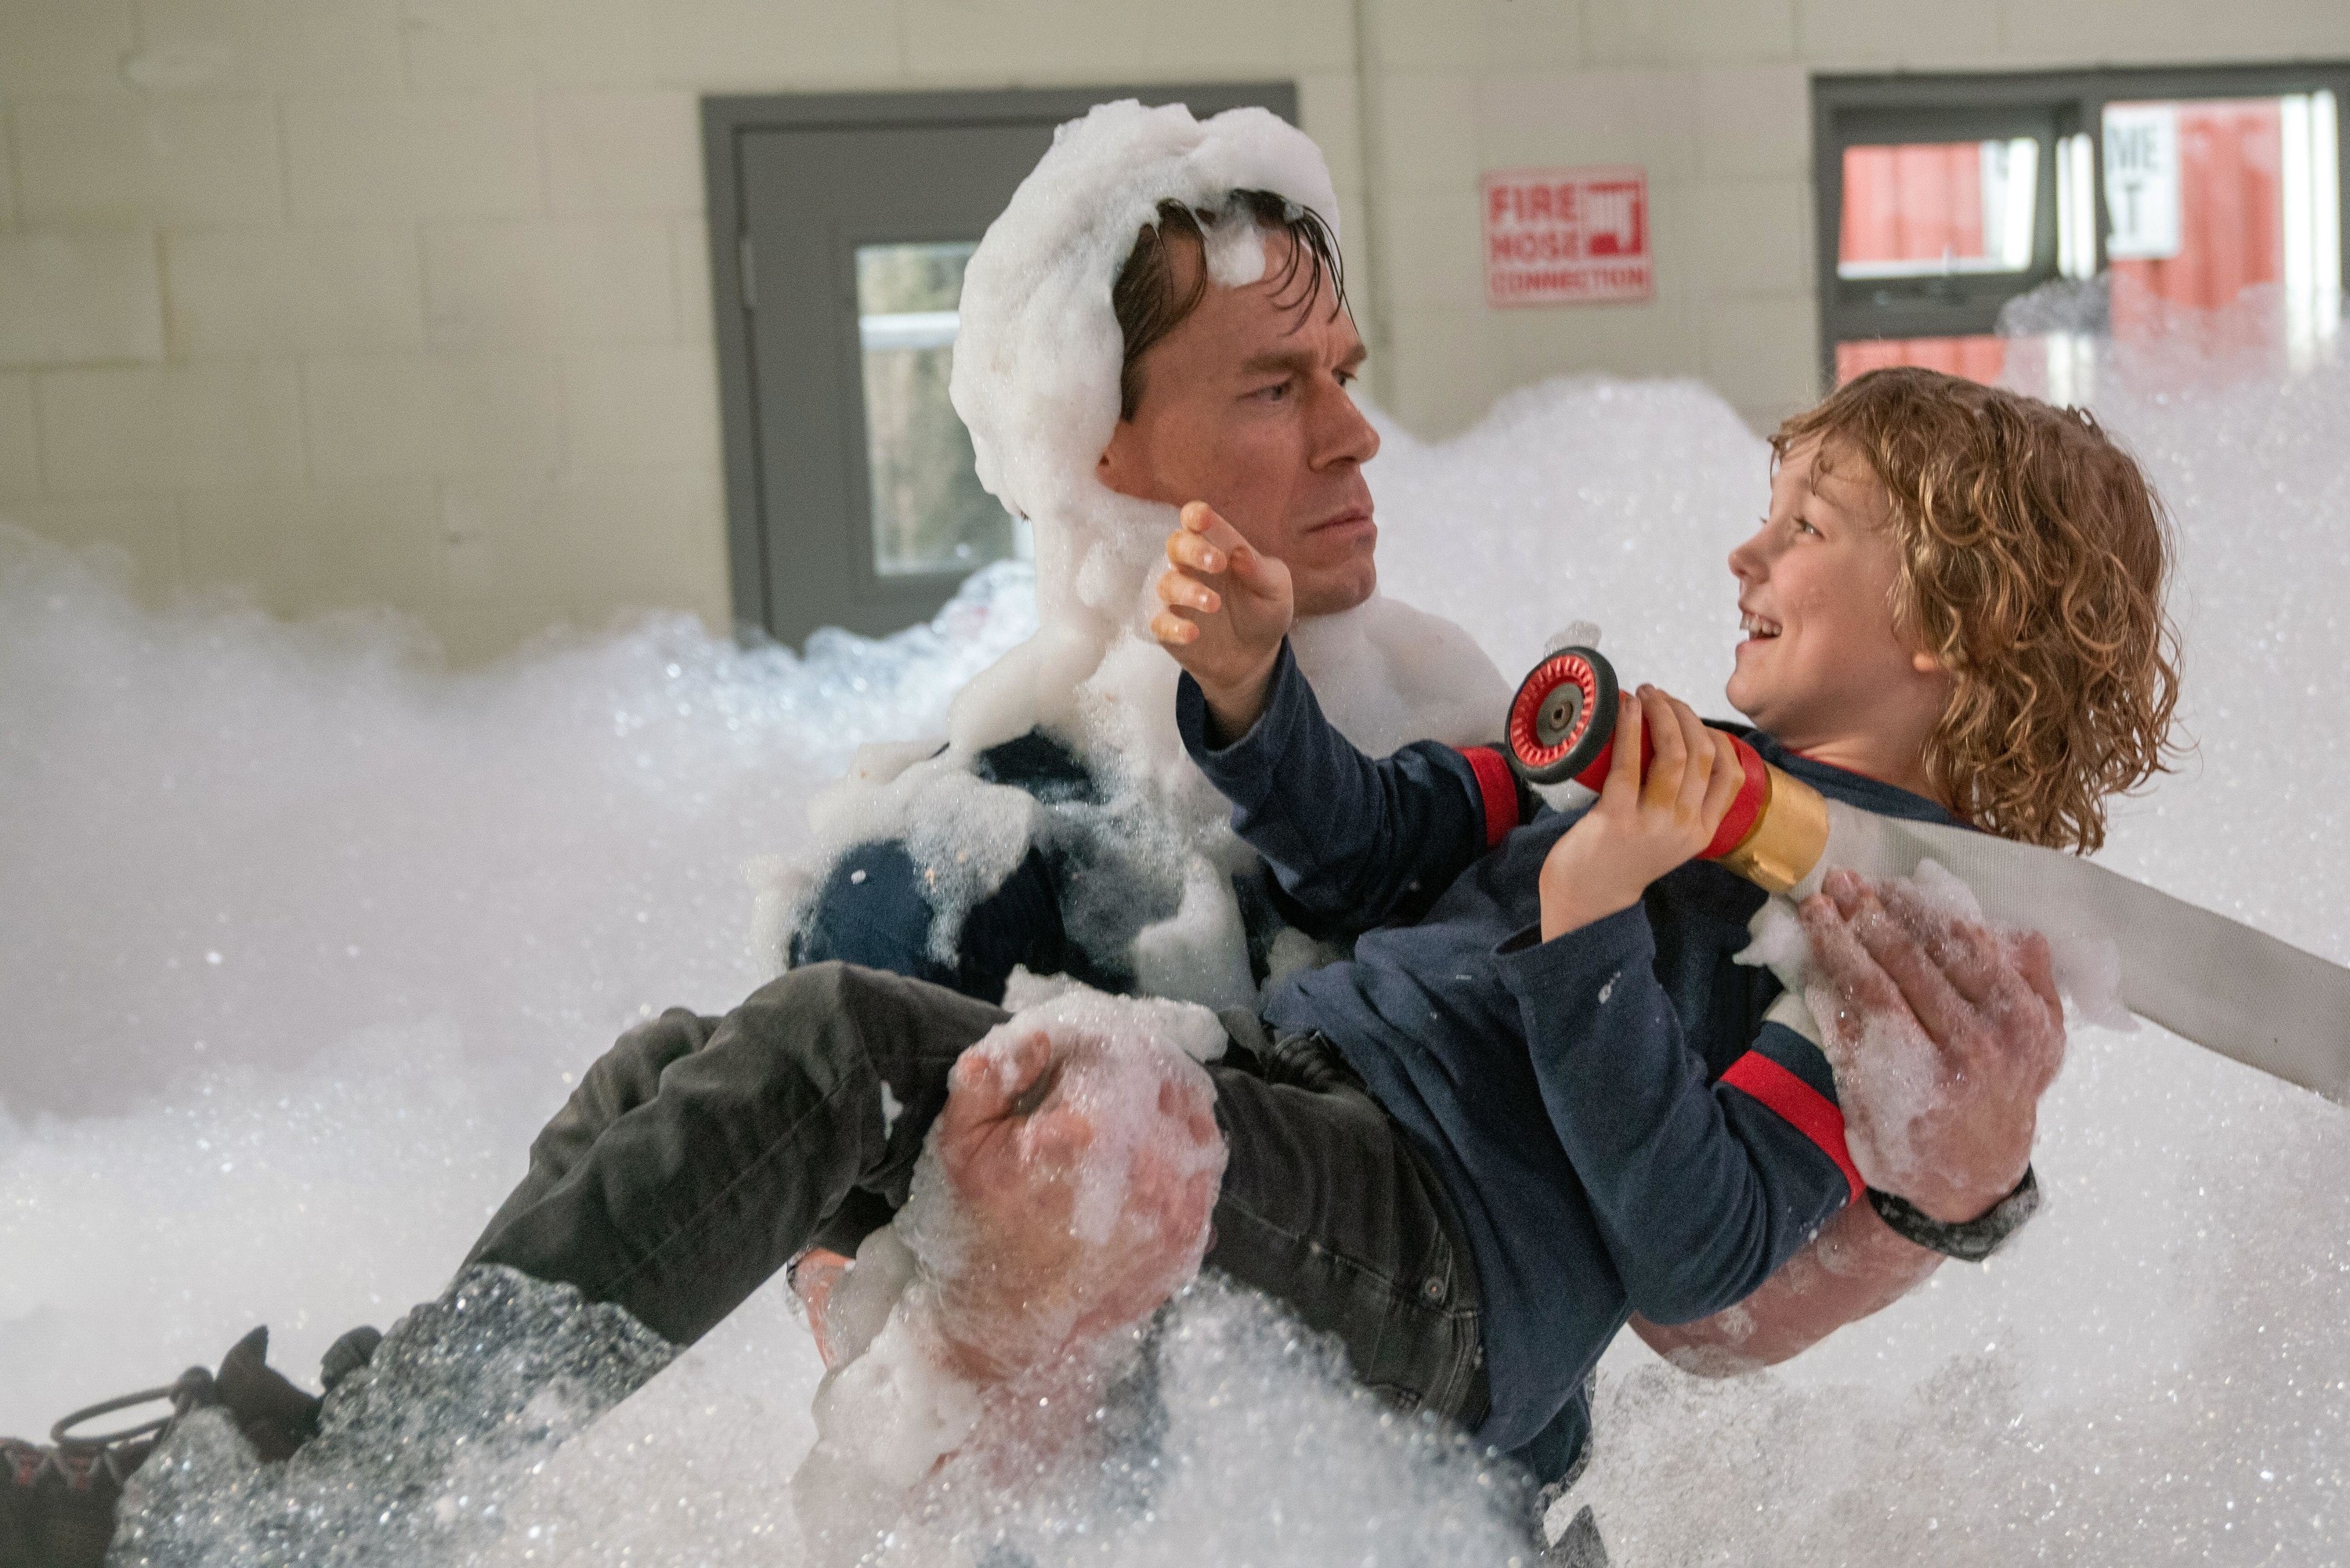 A disappointed man holds a smiling child in a room filled with foamy bubbles